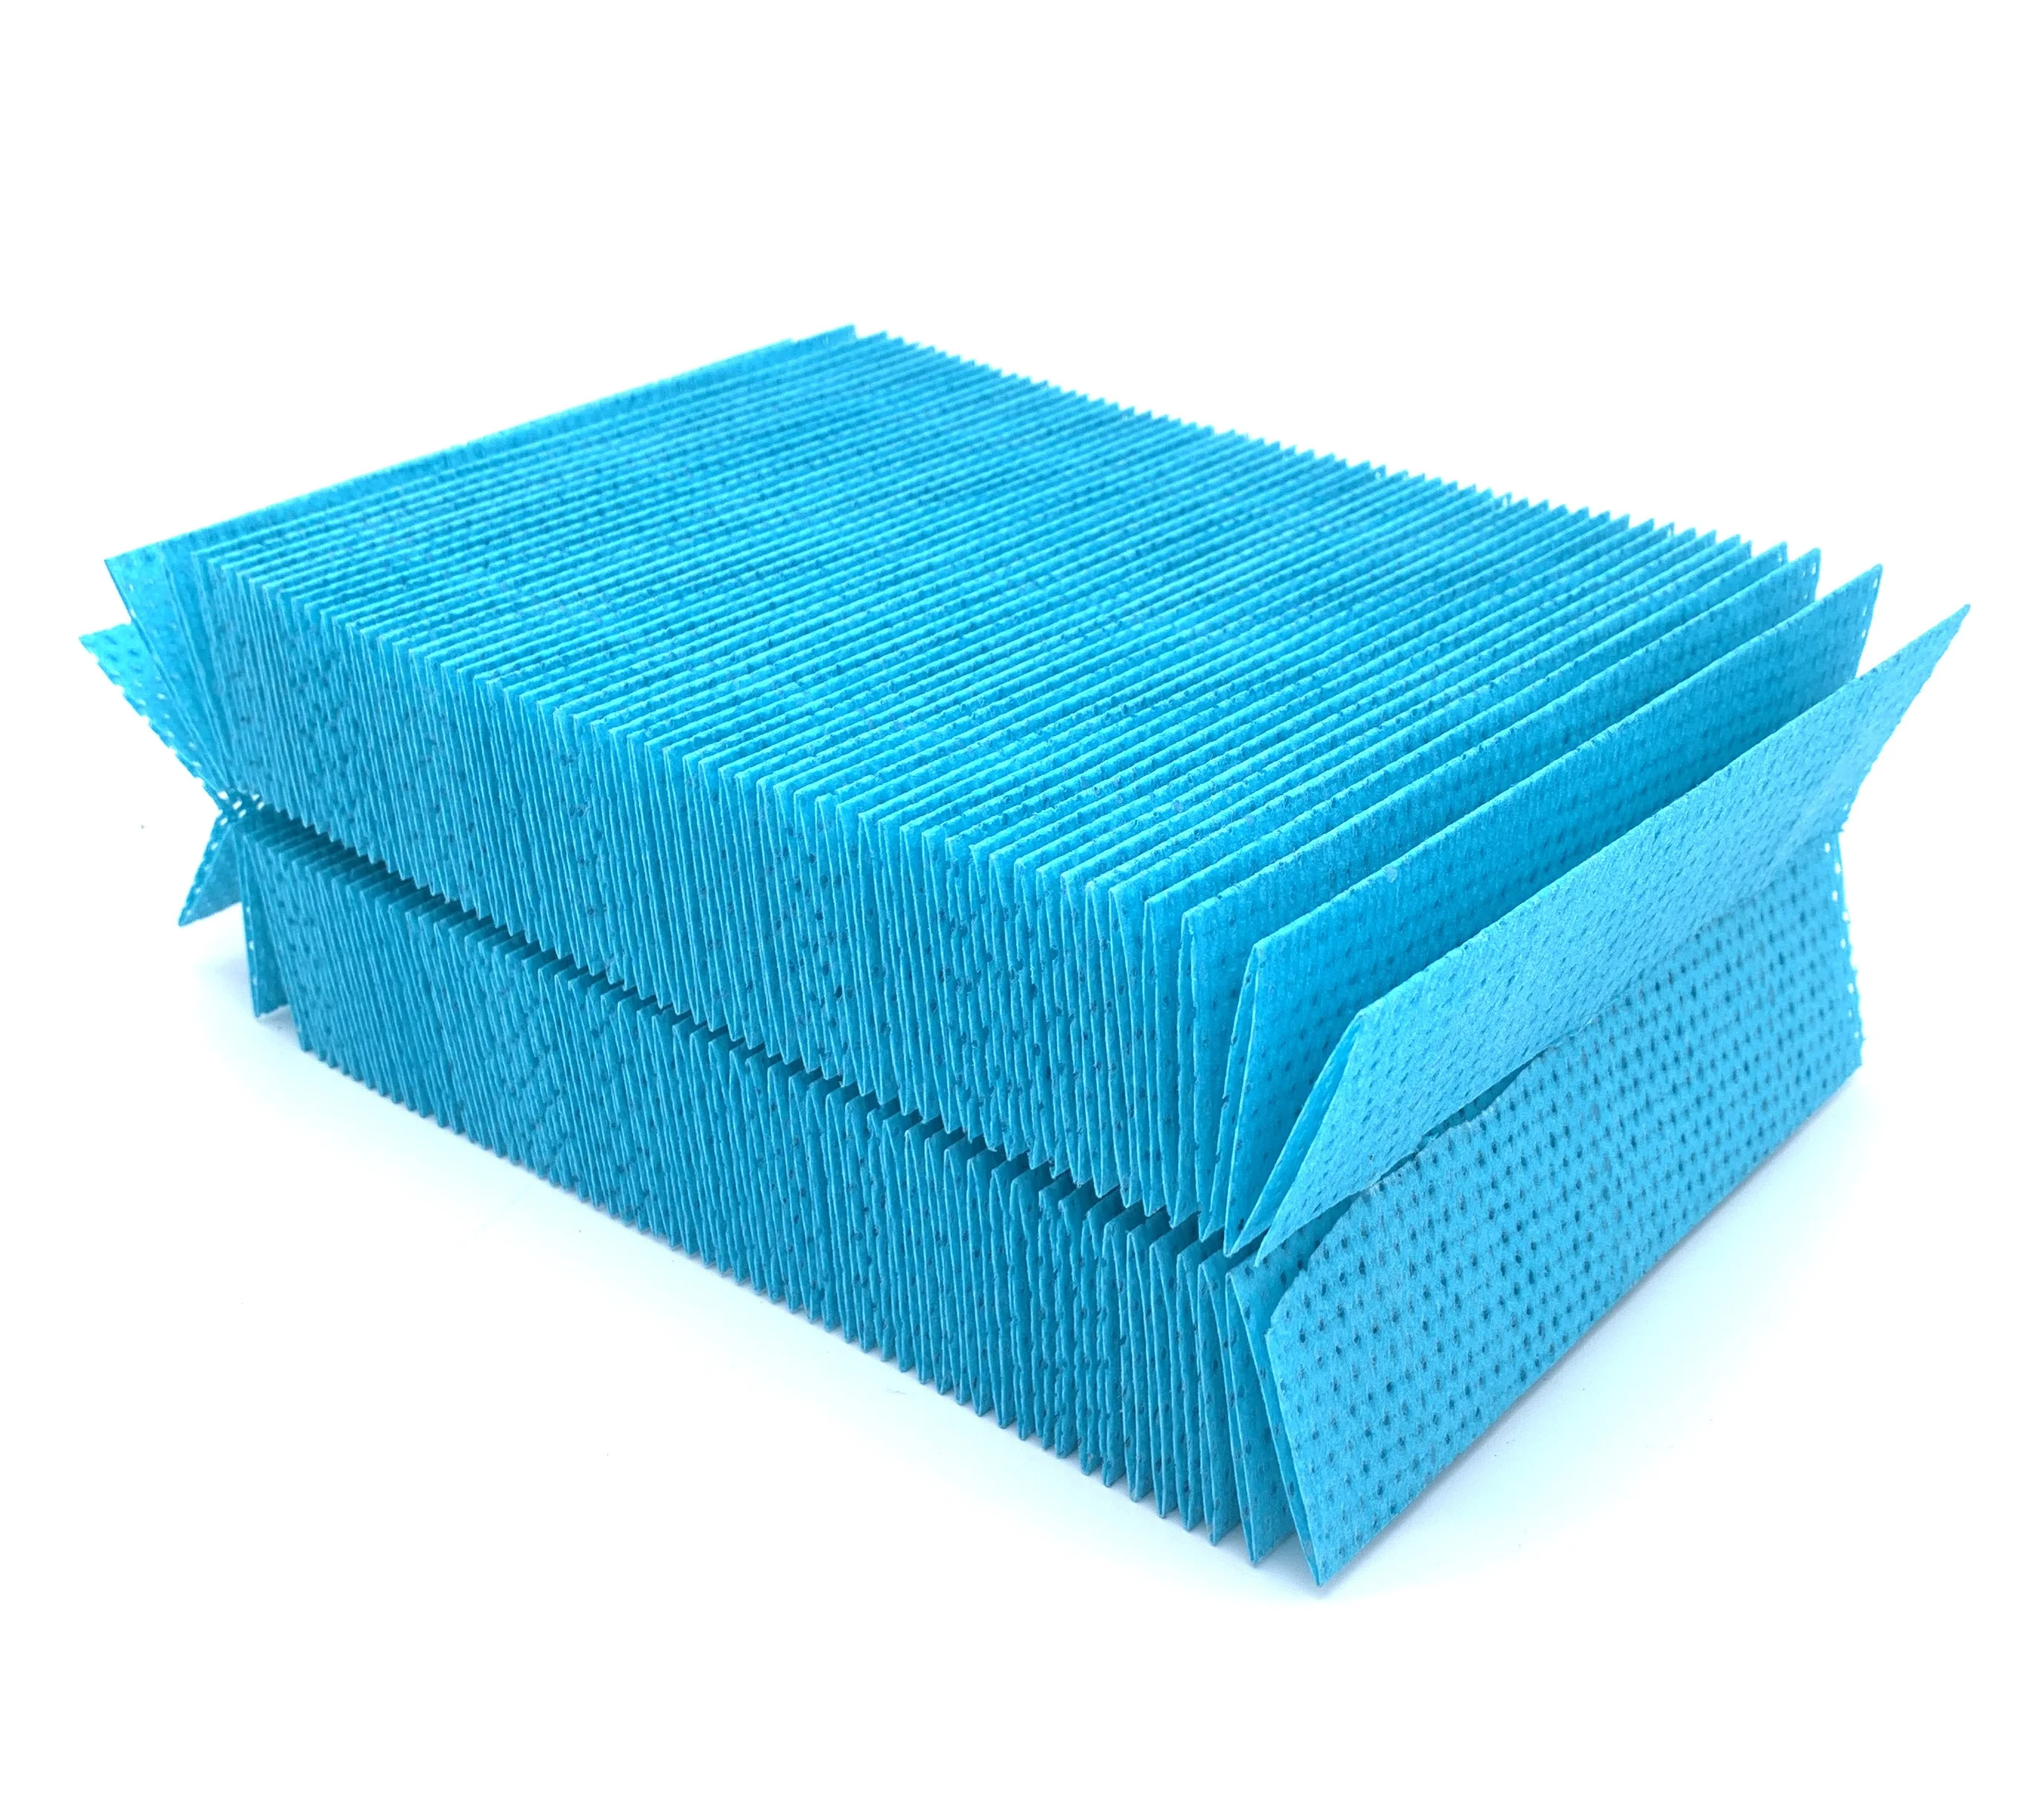 Nonwoven Fabric Evaporative Cooling Pad Replacement Humidifier Wick Filter